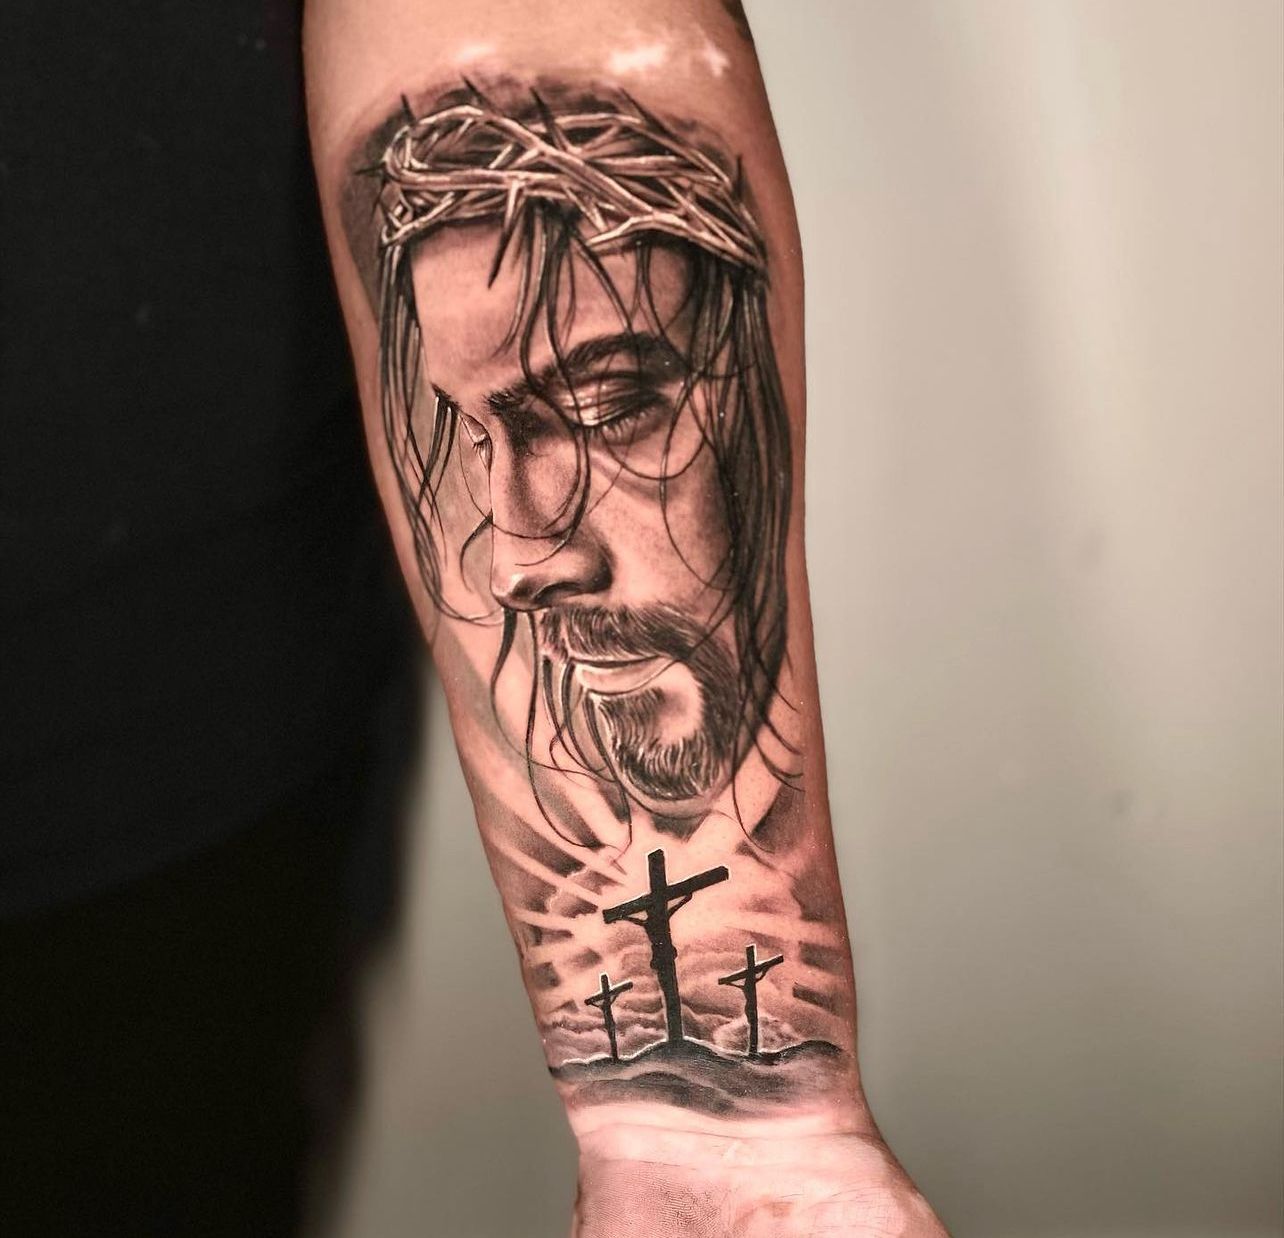 a man has a tattoo of jesus with a crown of thorns and crosses on his forearm .